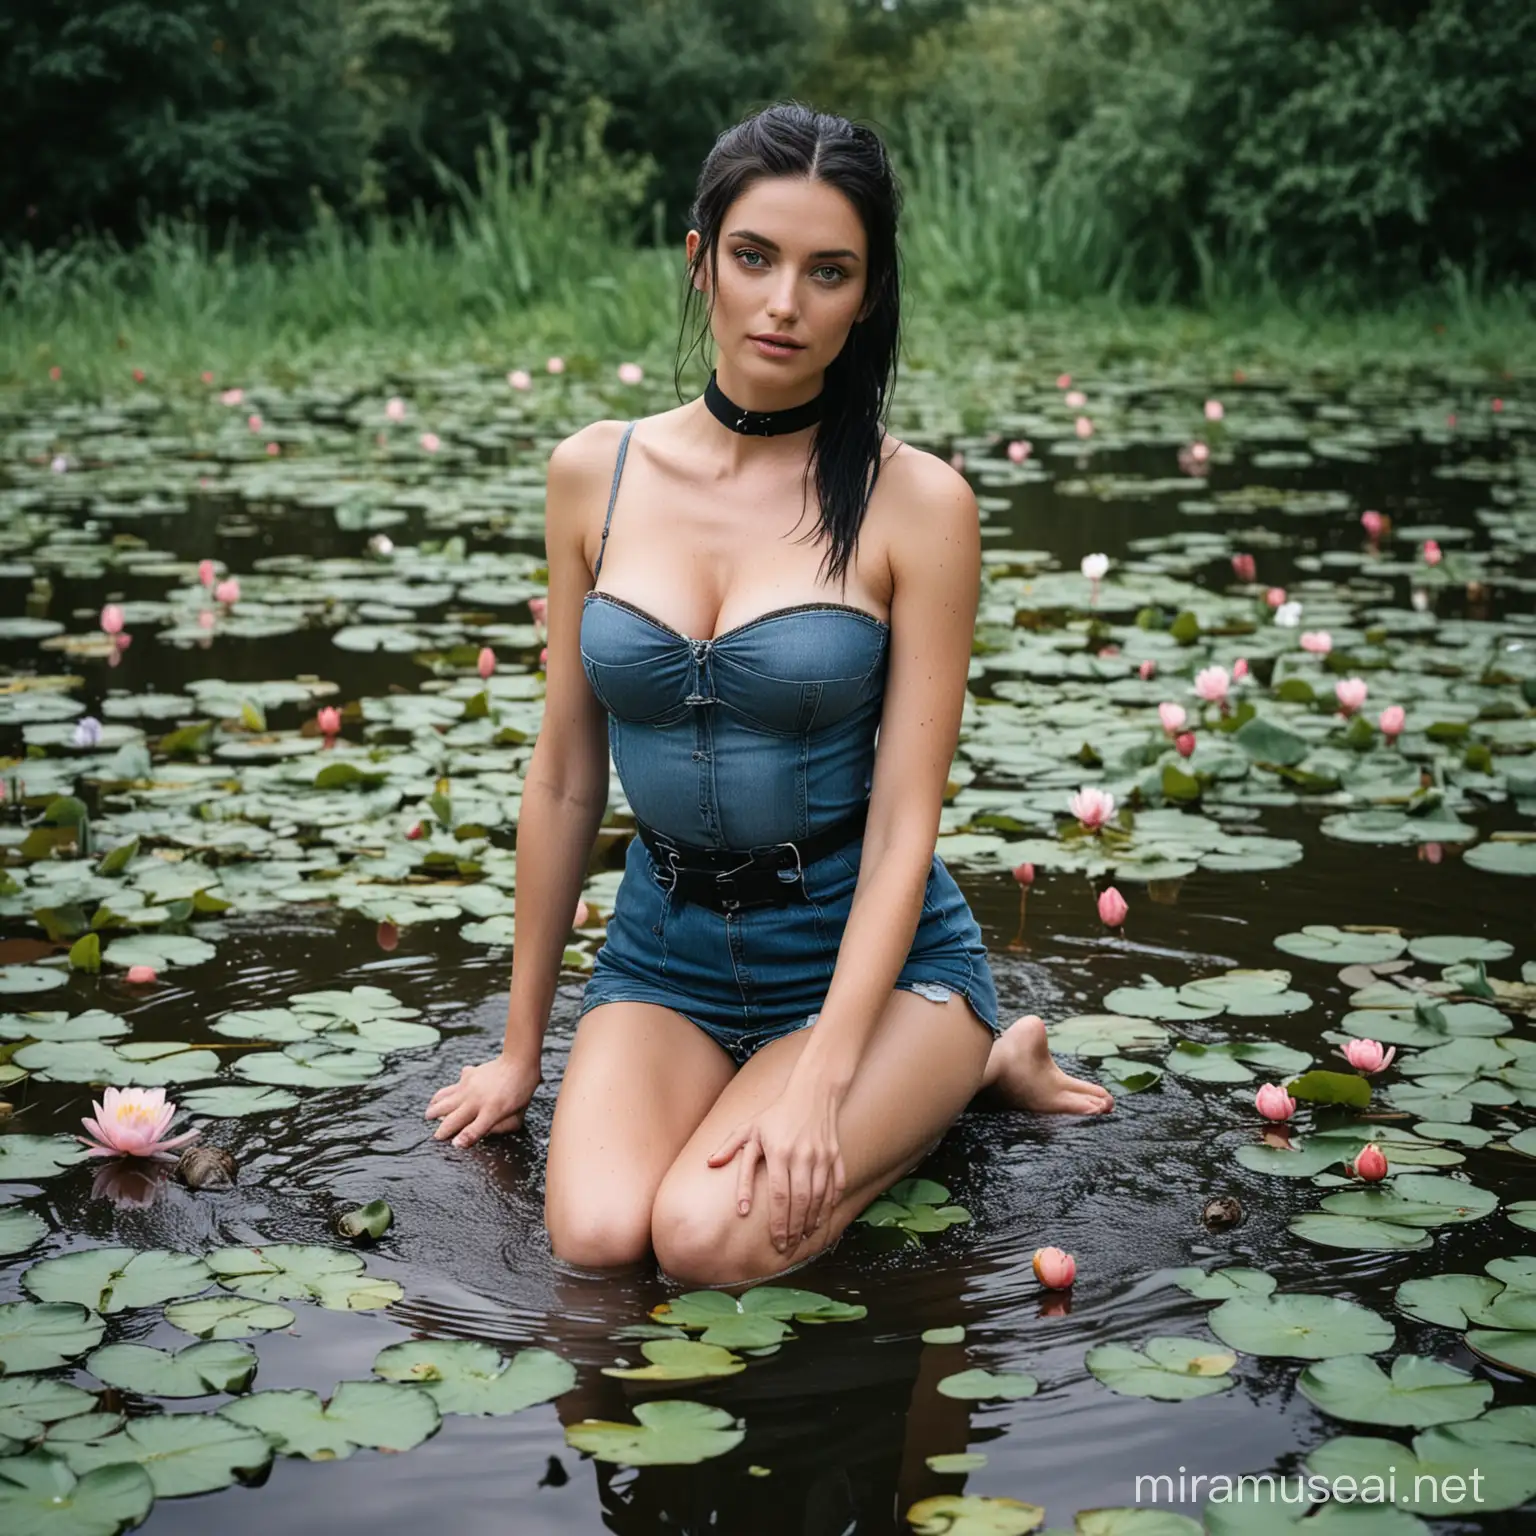 a full photograph of a tall woman with supermodel features and blue eyes and black hair and skinny, she is wearing a ponytail and a choker, she is 29 years old, she is not wearing a brassiere, she is wearing a bandage midi dress, the dress fabric is denim style, she is trapped in the pond with water lilies and large toads, she is almost drowned and all of her clothes are wet.